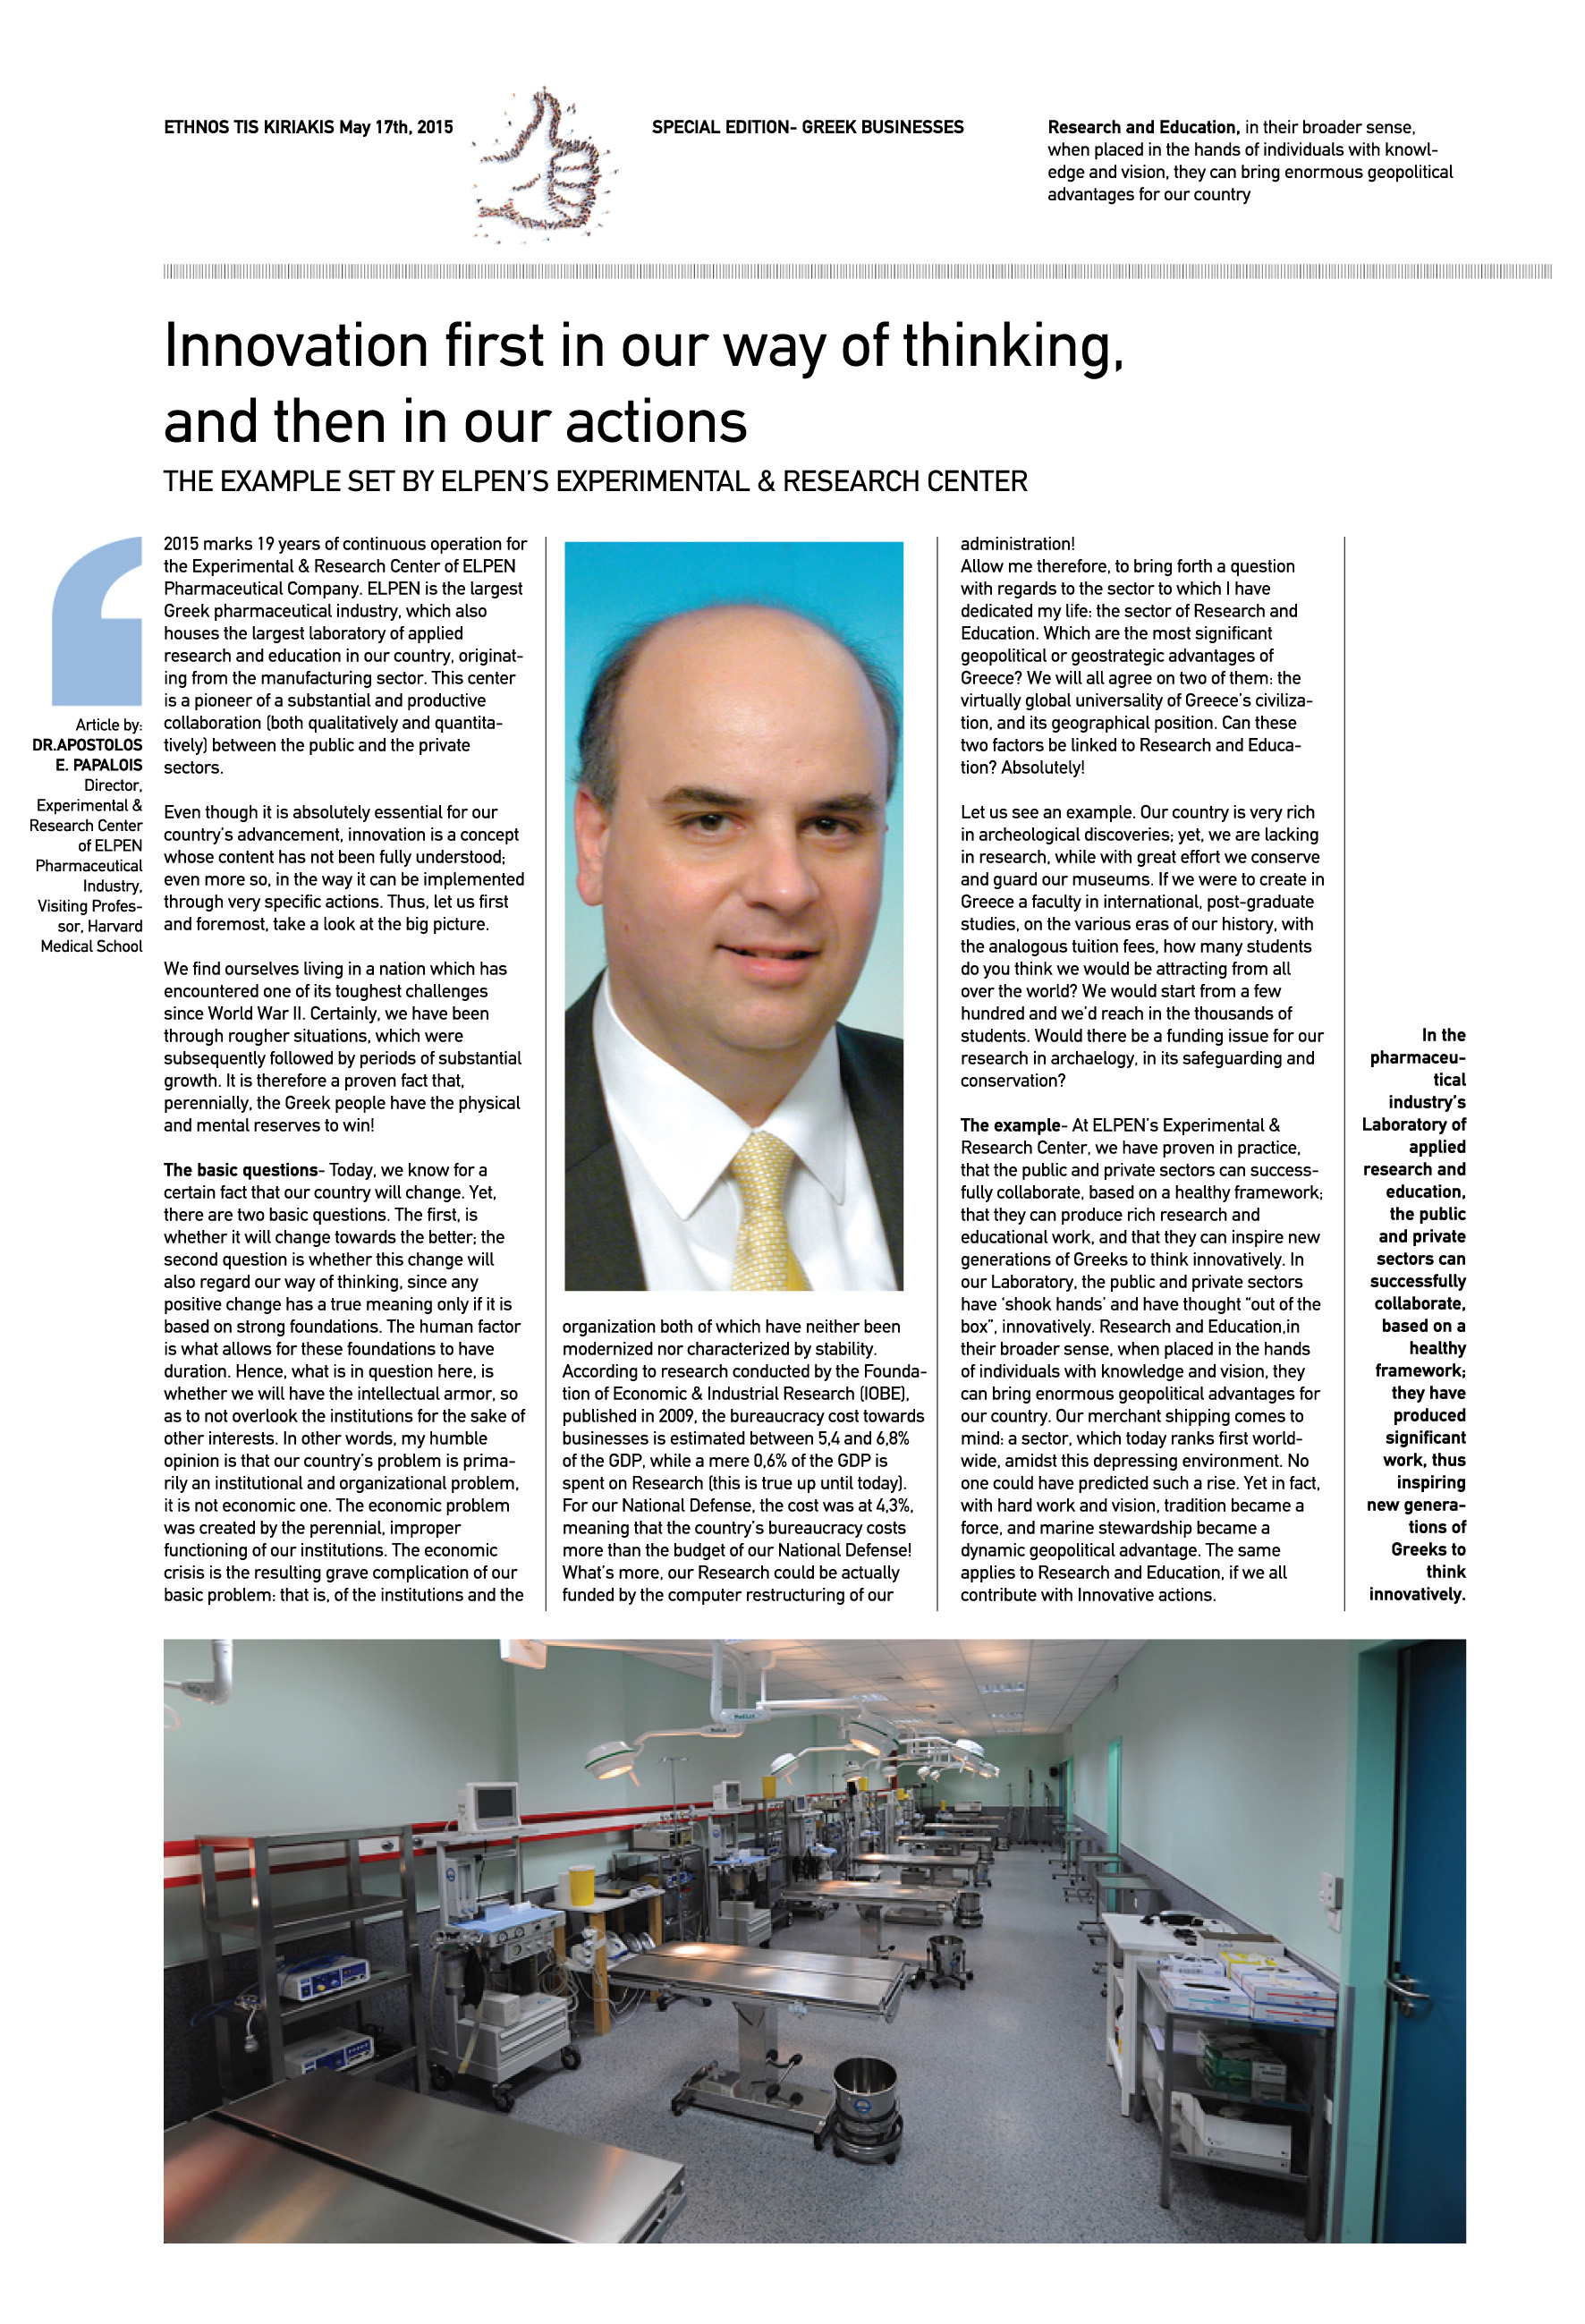 Innovation first in our way of thinking, and then in our actions ARTICLE by: Dr.Apostolos E. Papalois Director of Experimental & Research Center of ELPEN 